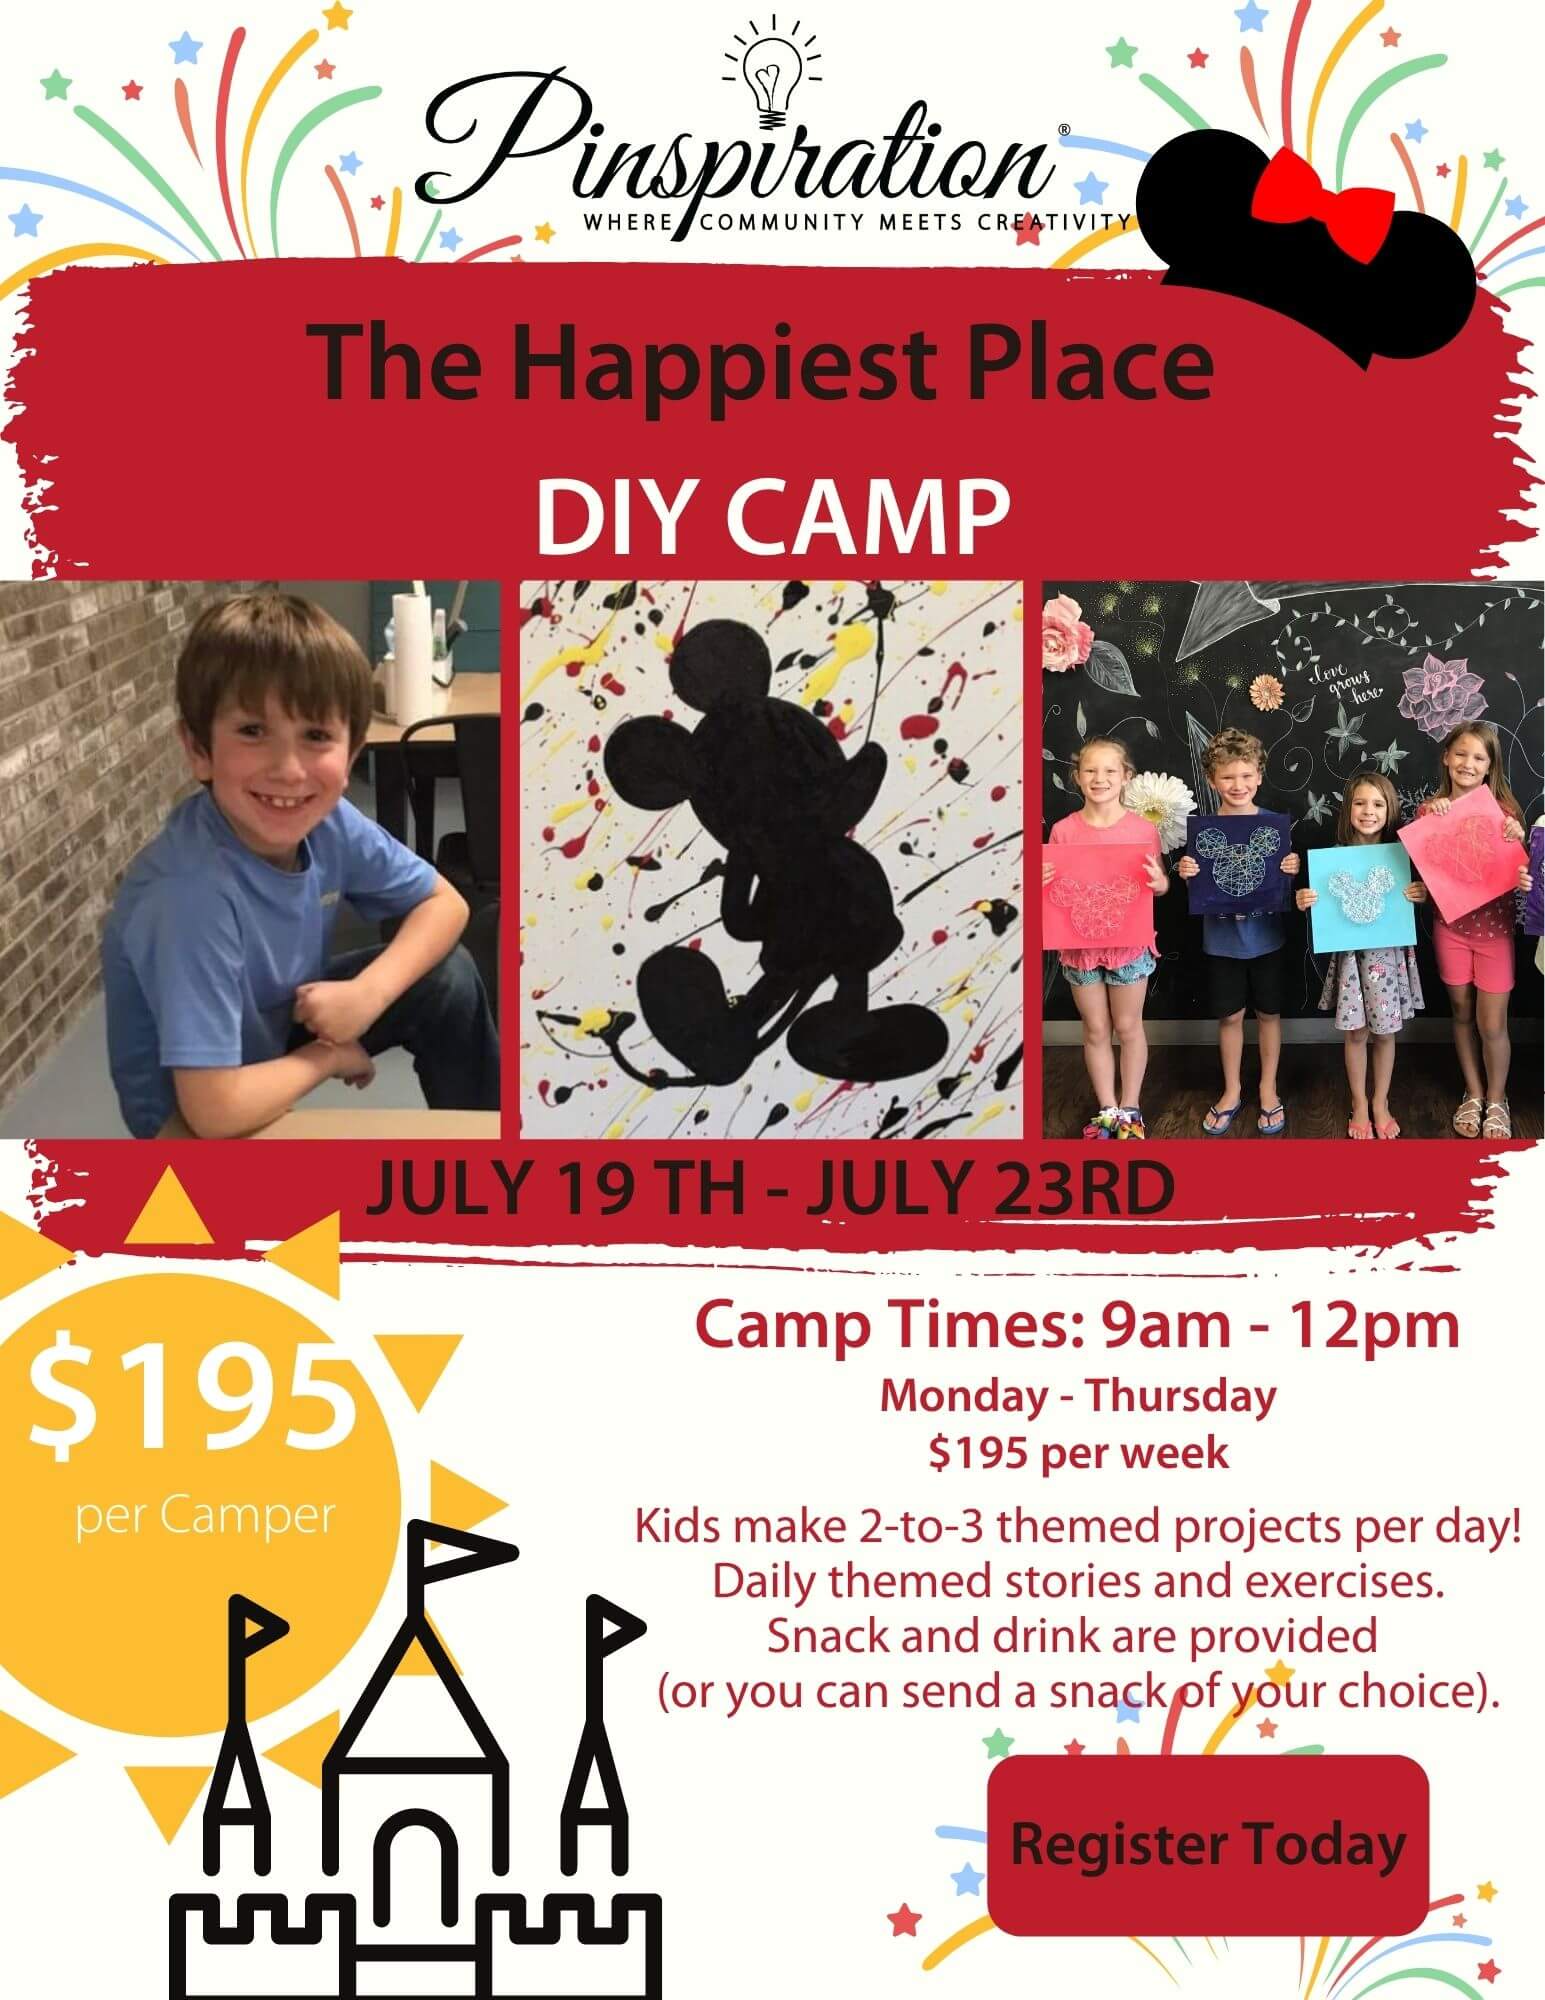 The Happiest Place DIY Summer Camp